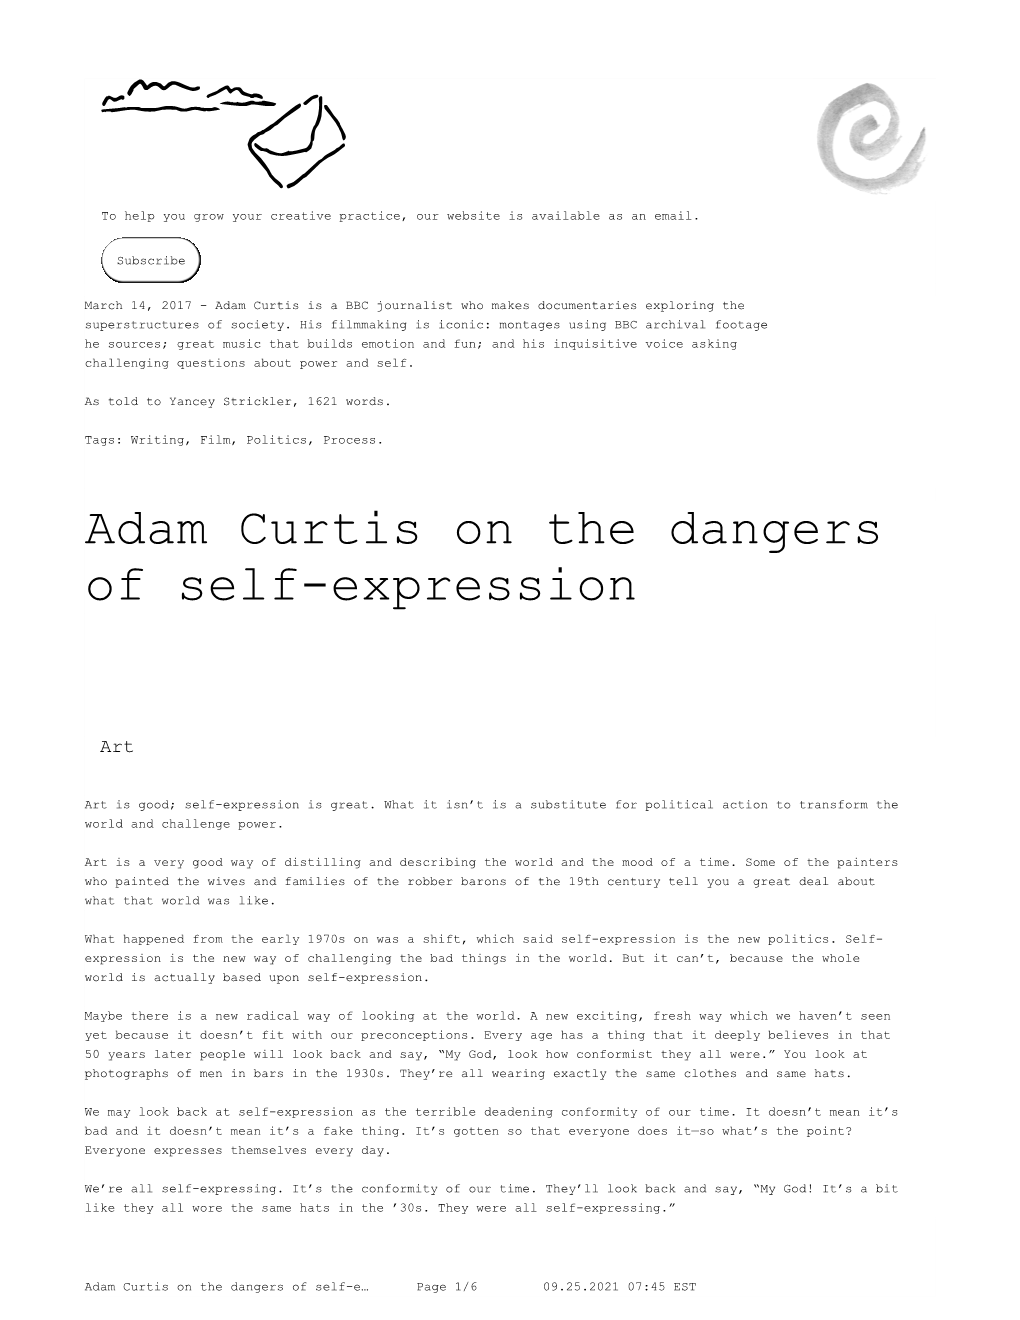 Adam Curtis on the Dangers of Self-Expression